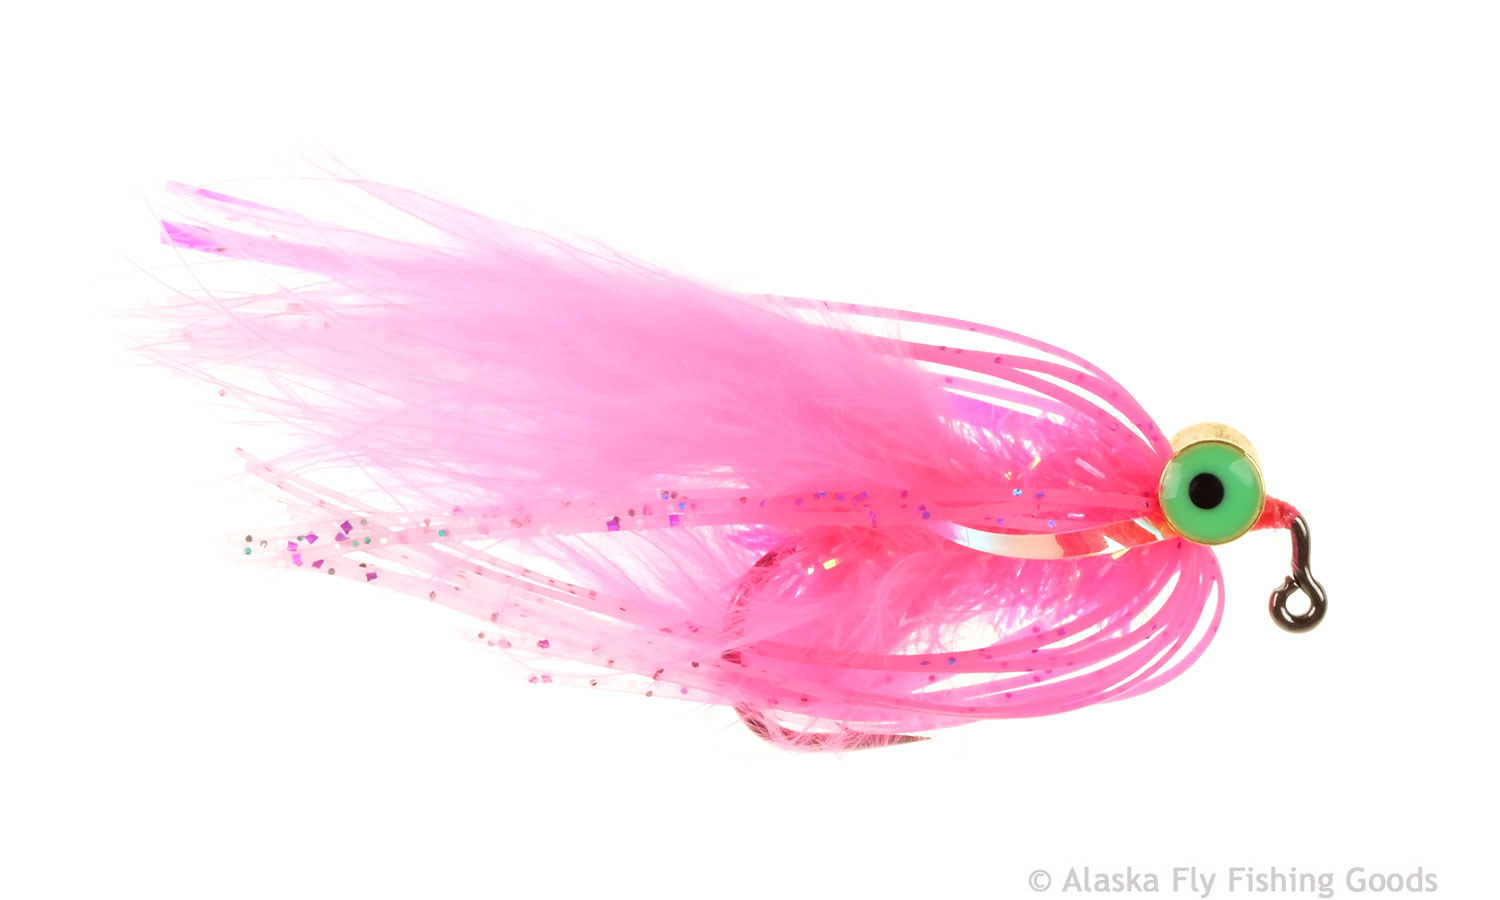 Eagle Claw Double Hook Flounder Rig w/Corn Bead, Pink Tubing & 3 Way Swivel  - Mr FLY